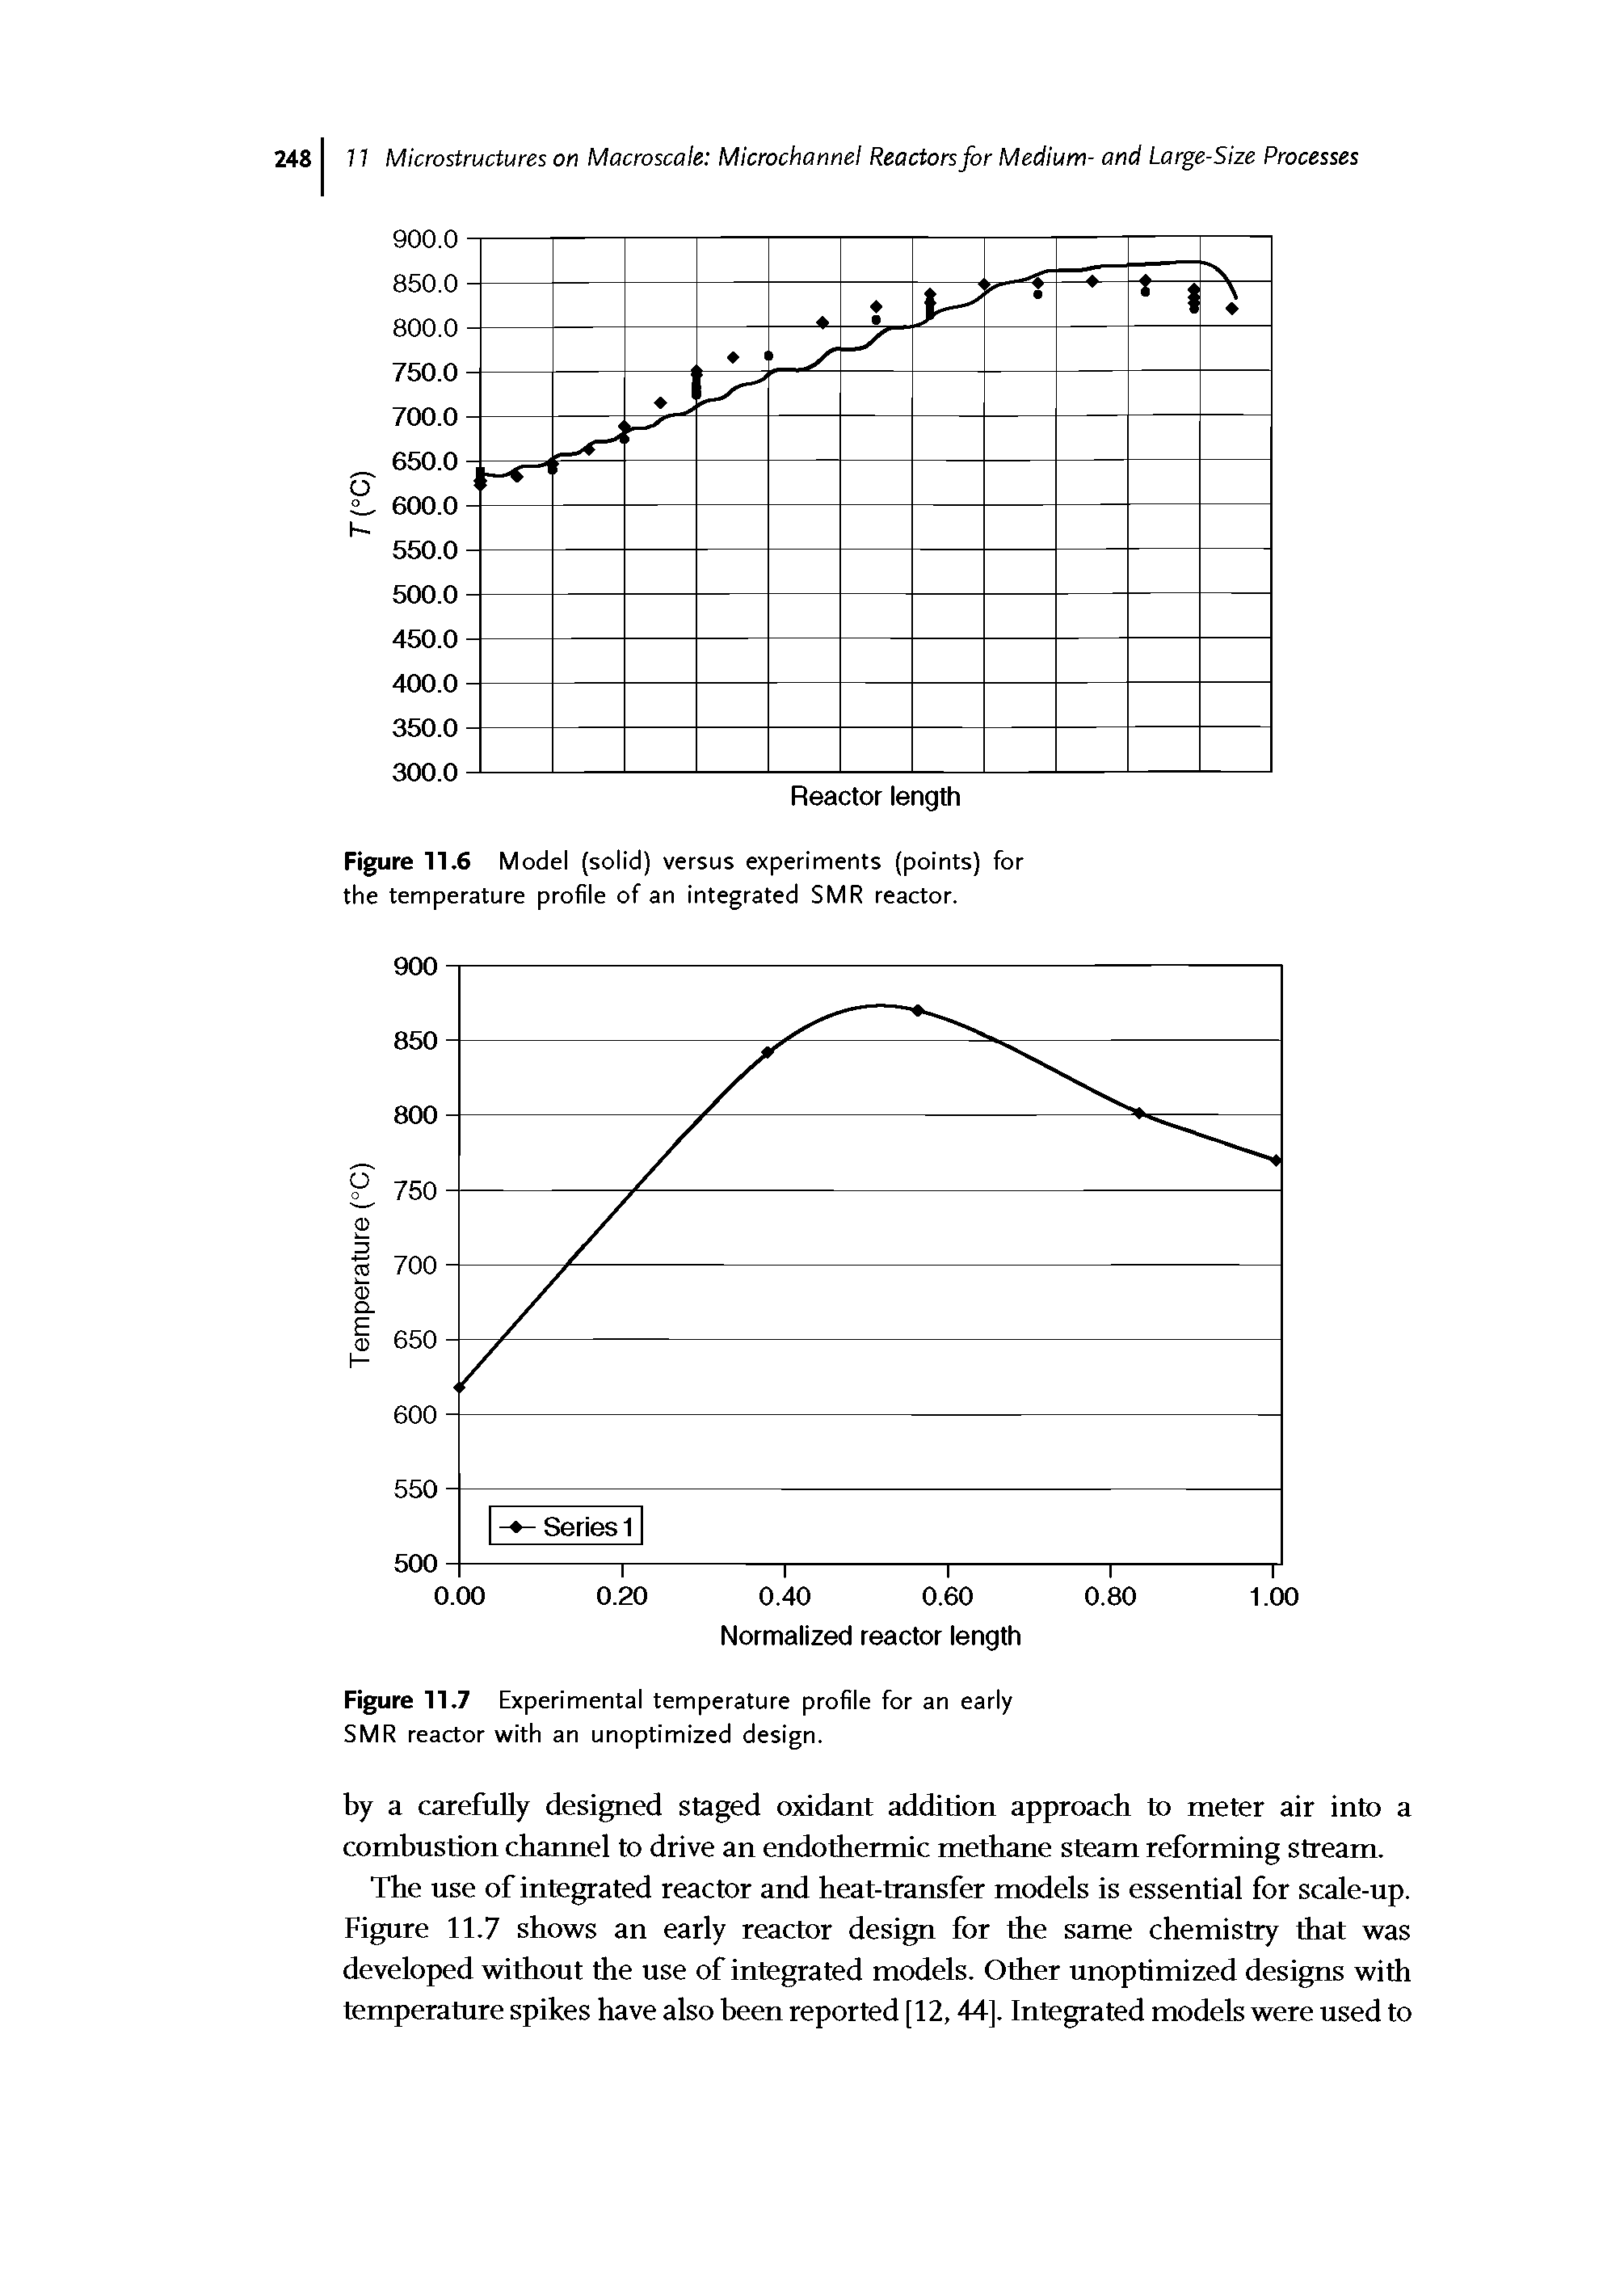 Figure 11.7 Experimental temperature profile for an early SMR reactor with an unoptimized design.